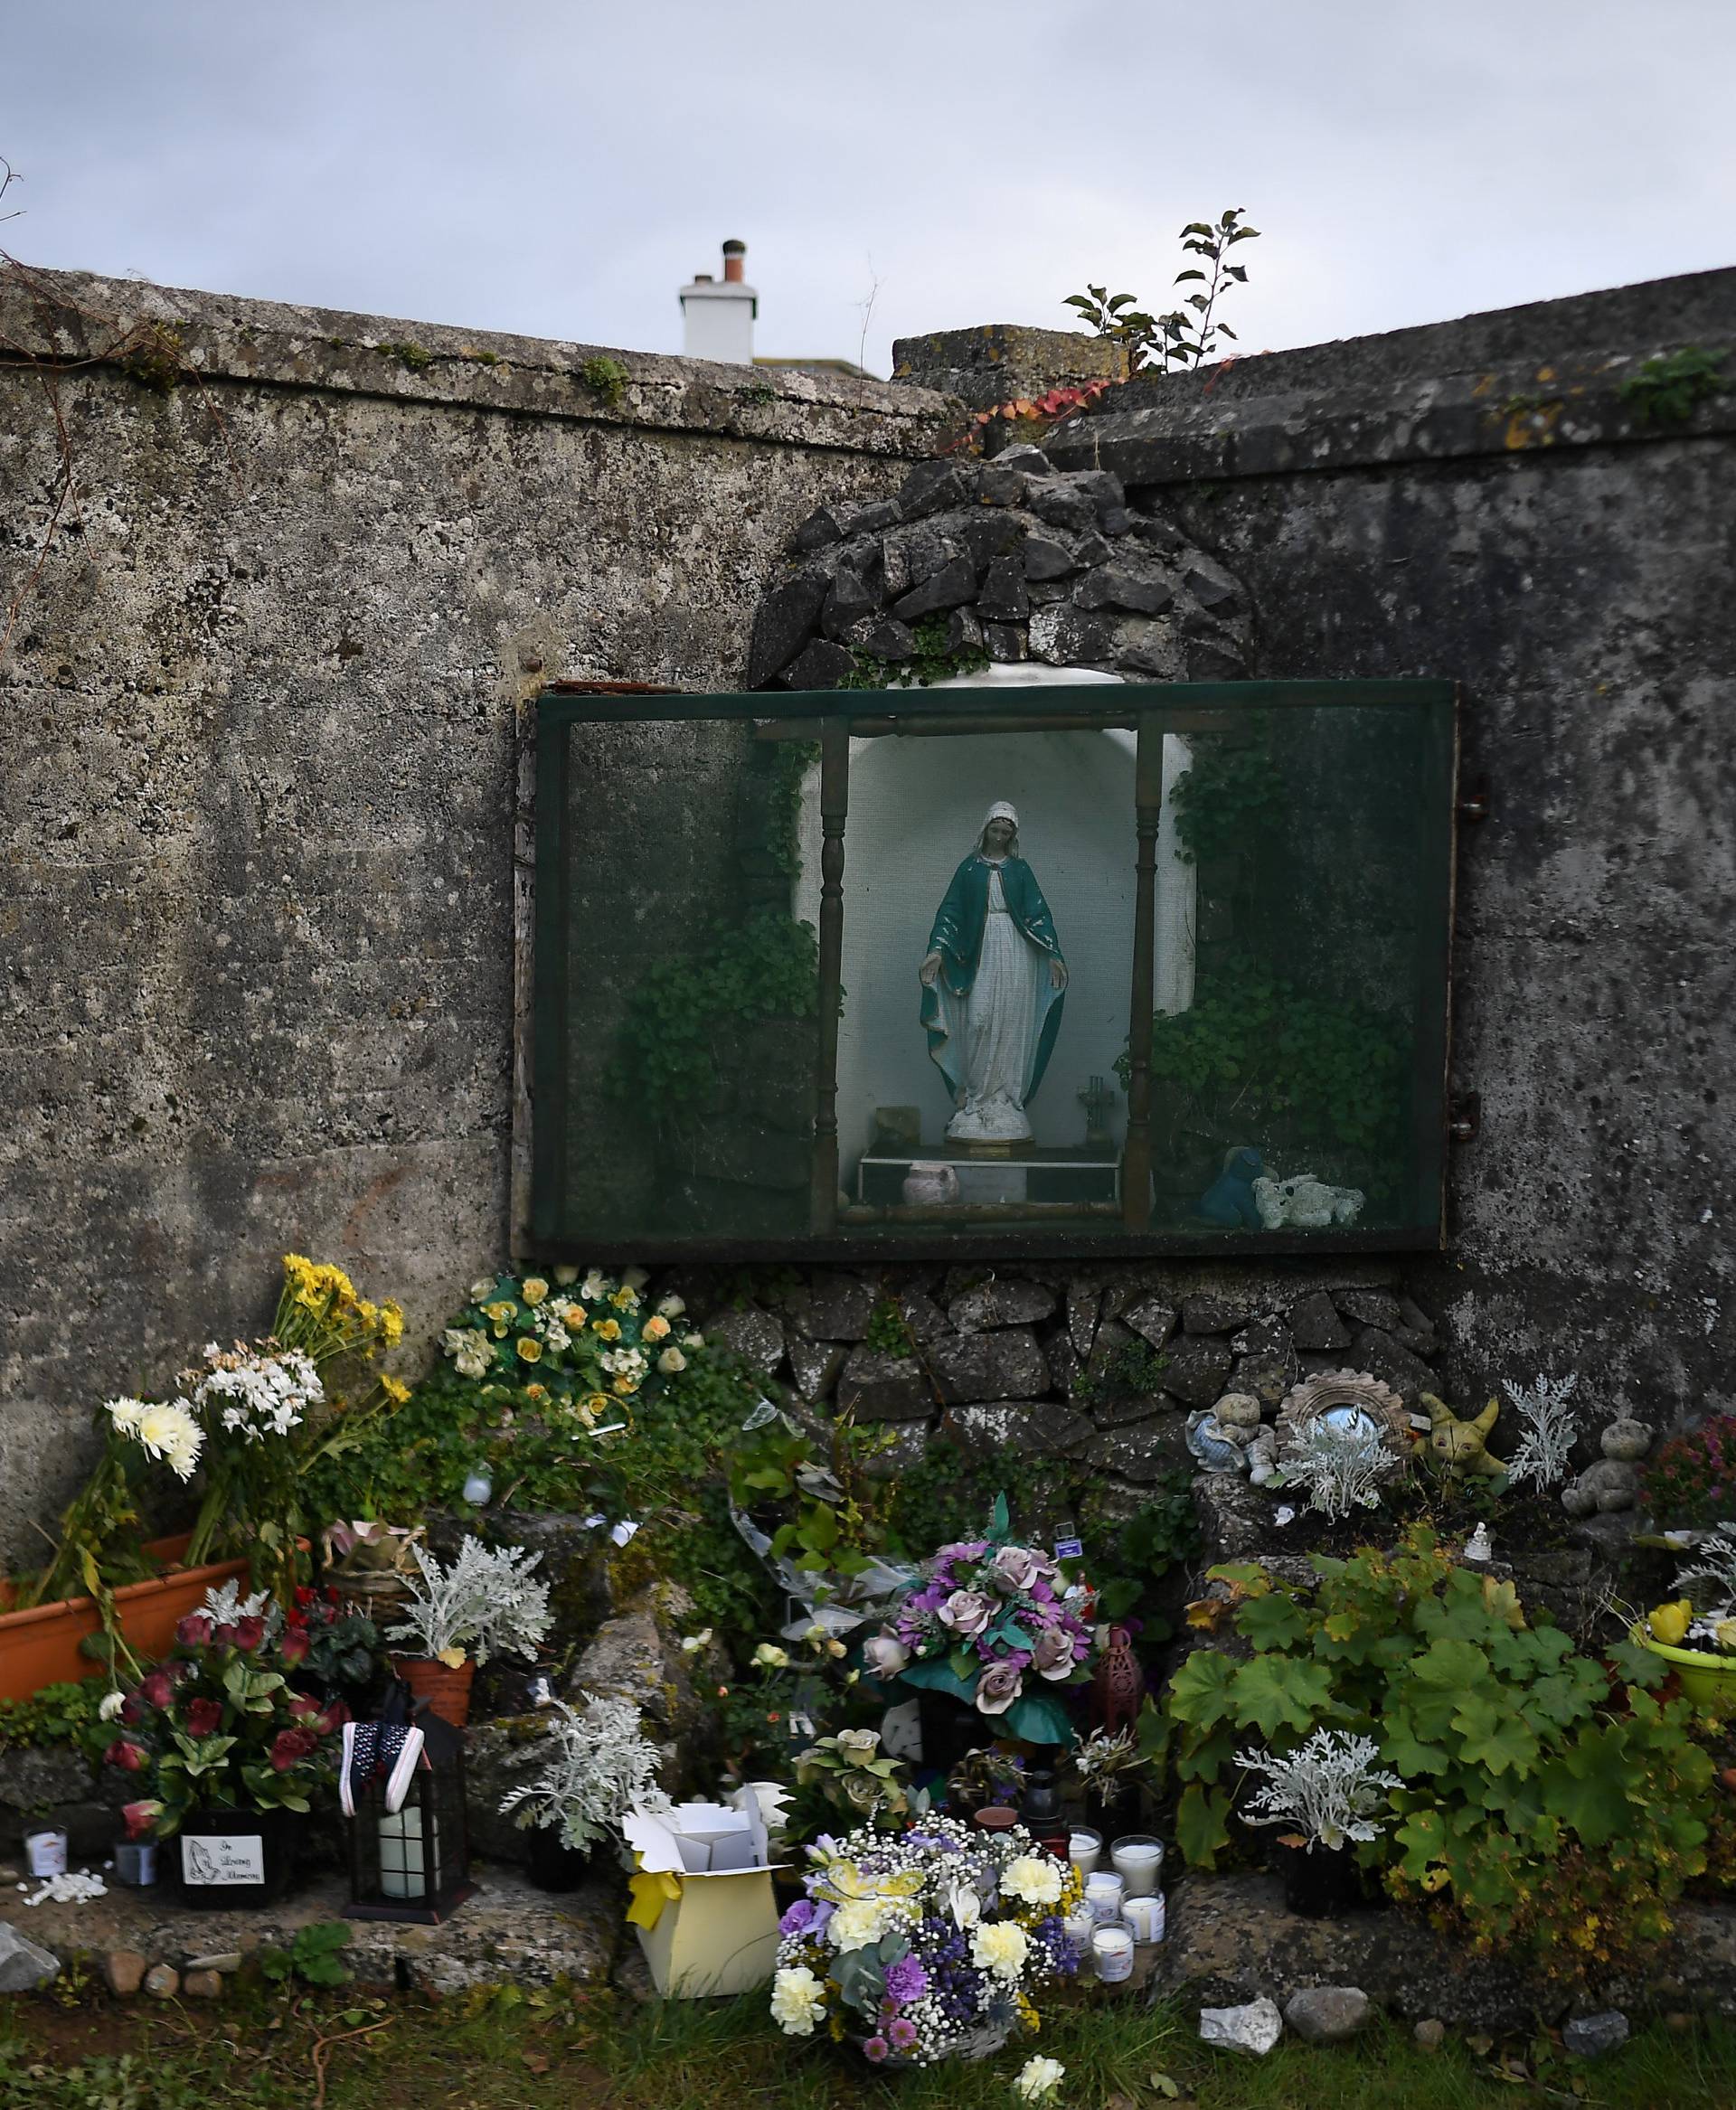 A man is seen at the site of the Tuam babies graveyard where the bodies of 796 babies were uncovered at a former Catholic home in Tuam